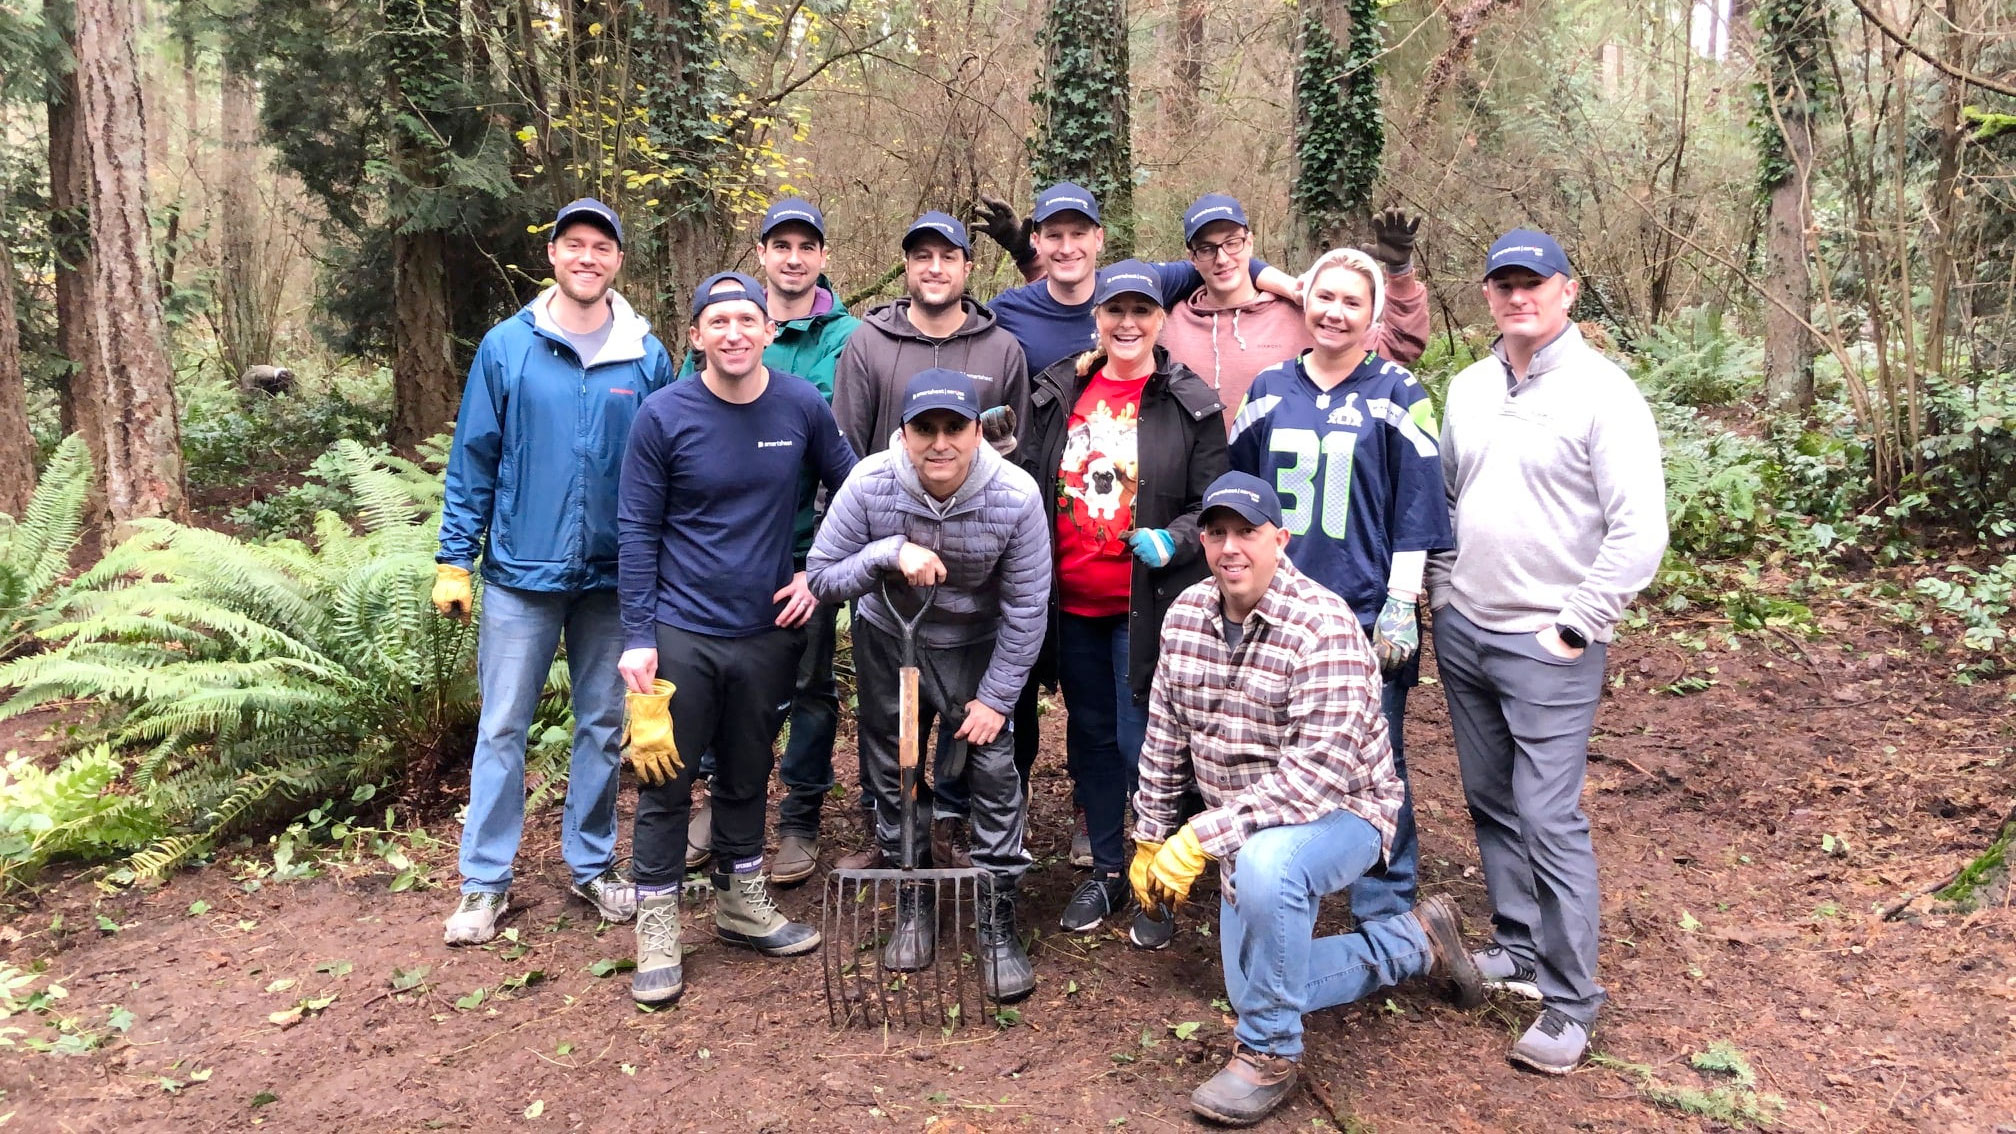 Smartsheet employees pose for a group photos amidst ferns and a wooded forest area.